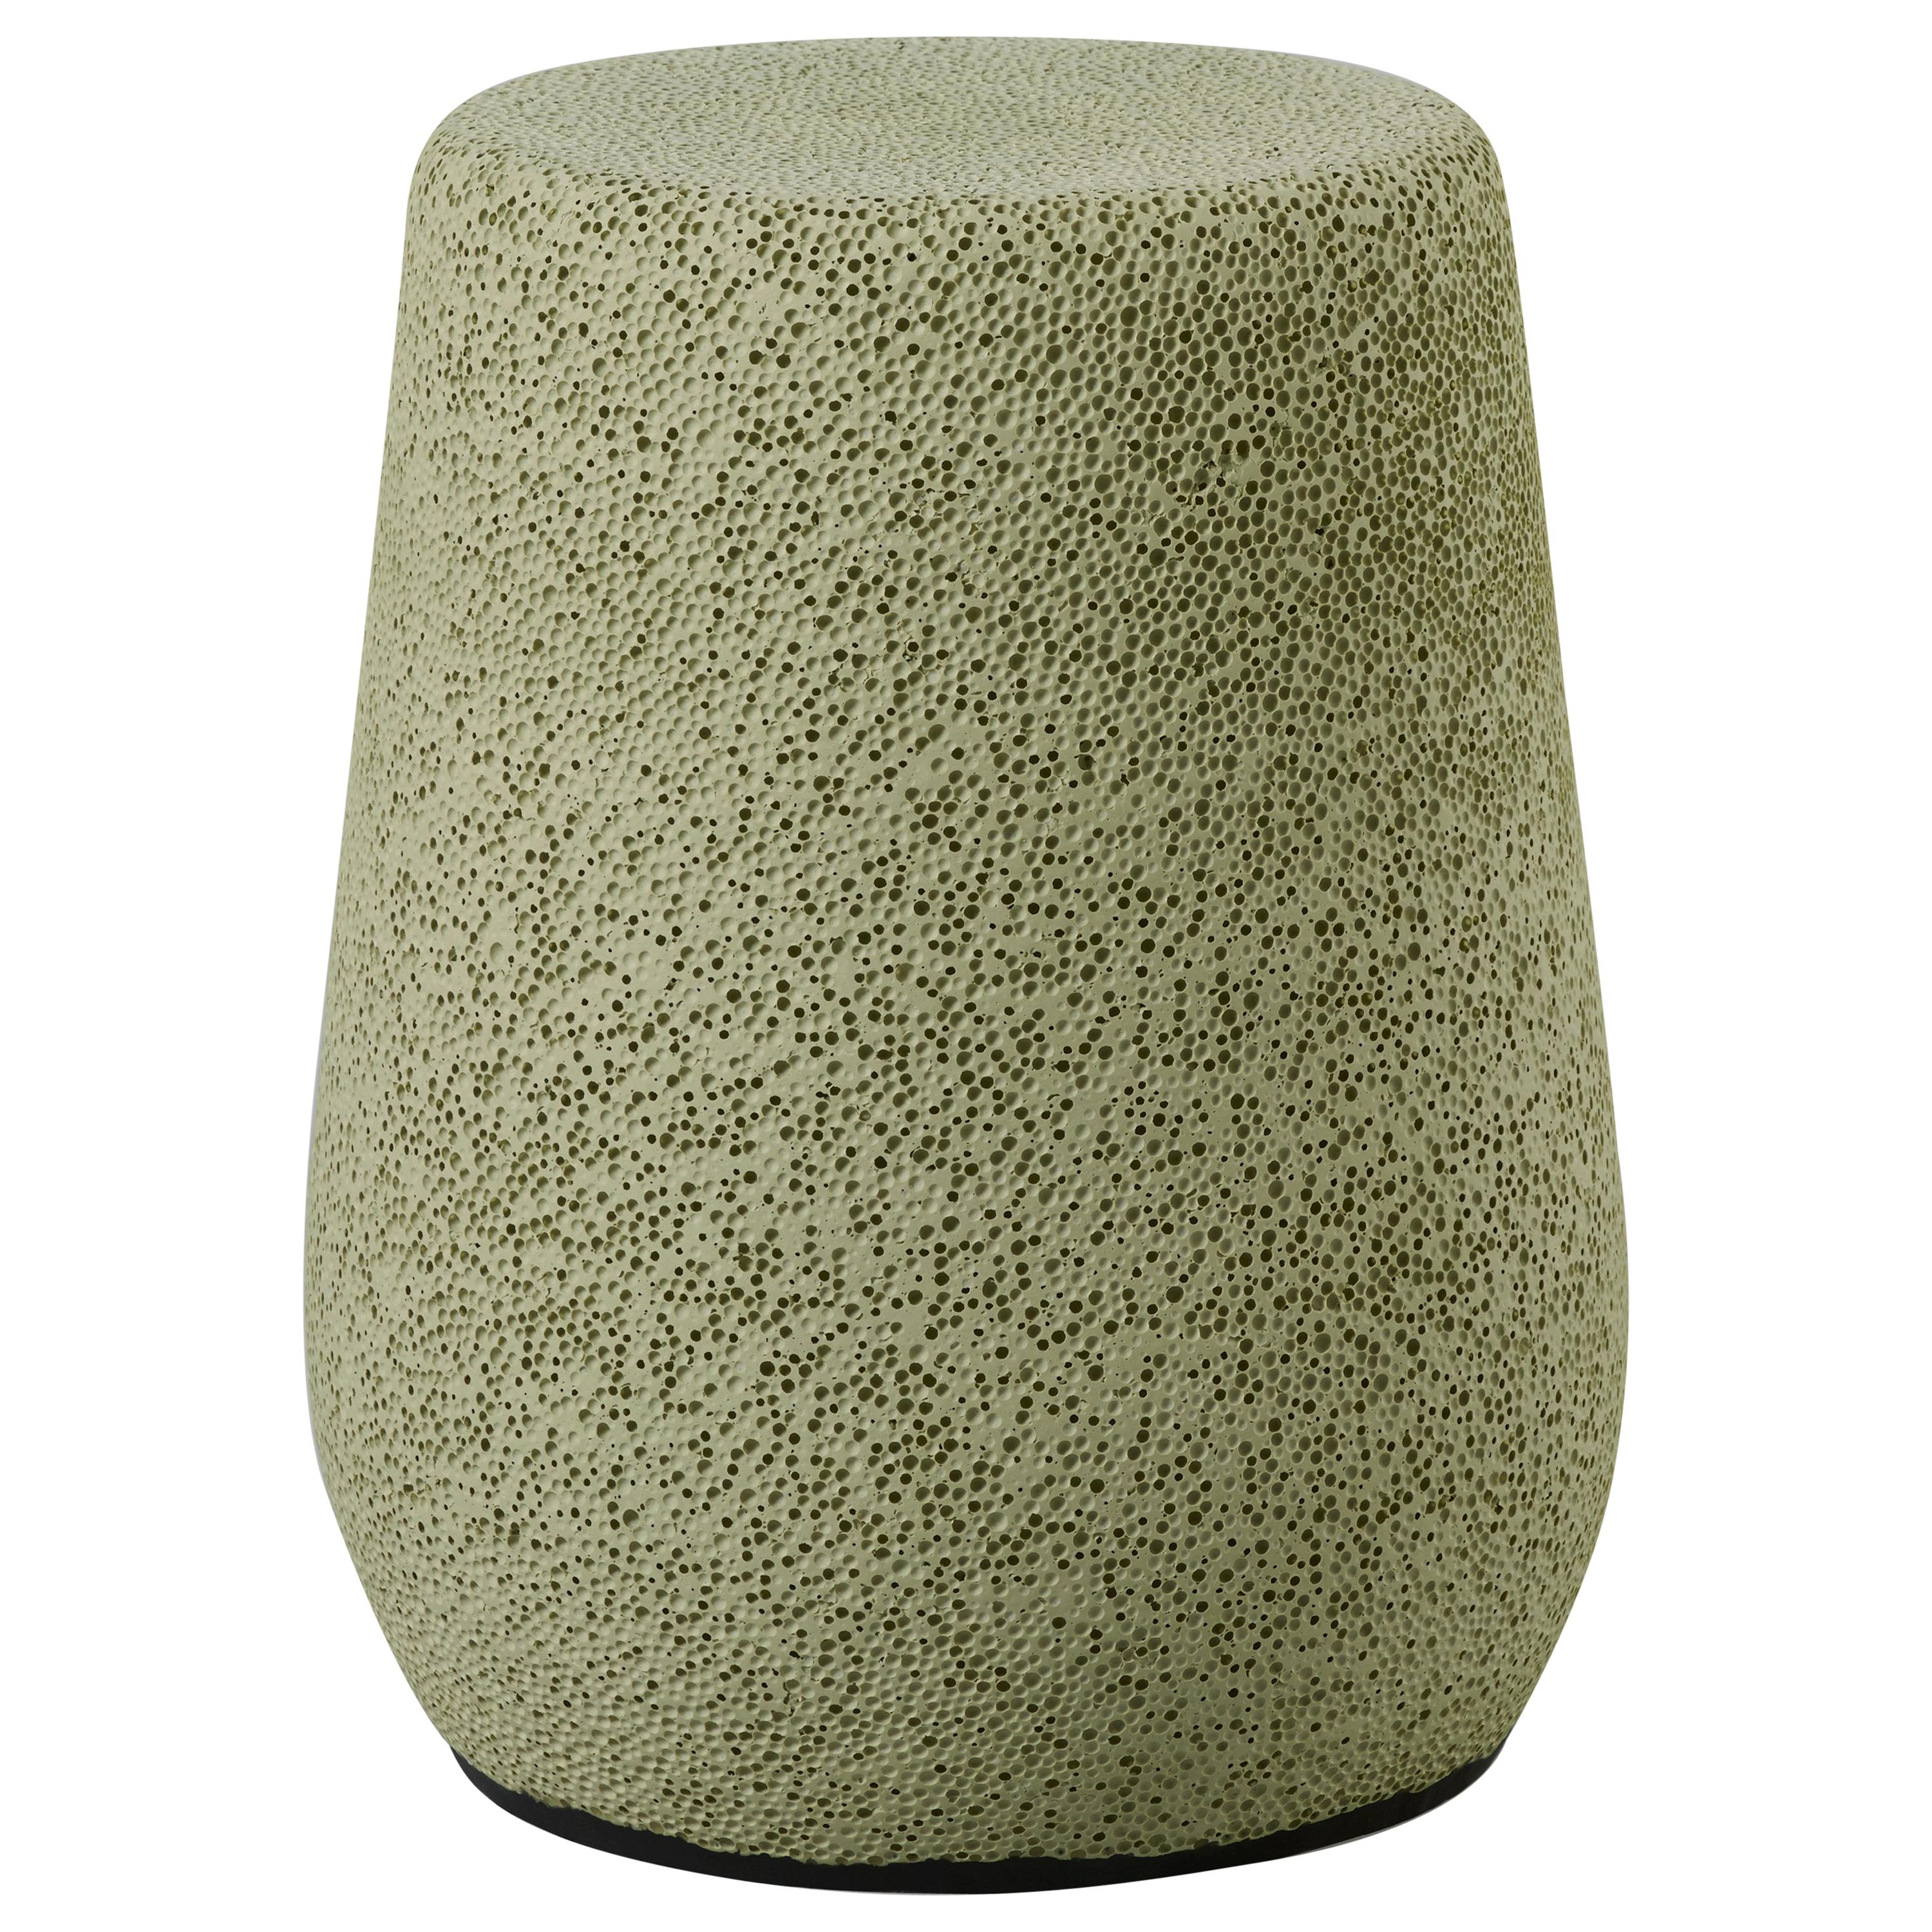 'Lightweight Porcelain' Stool and Side Table by Djim Berger - Yellow Green For Sale